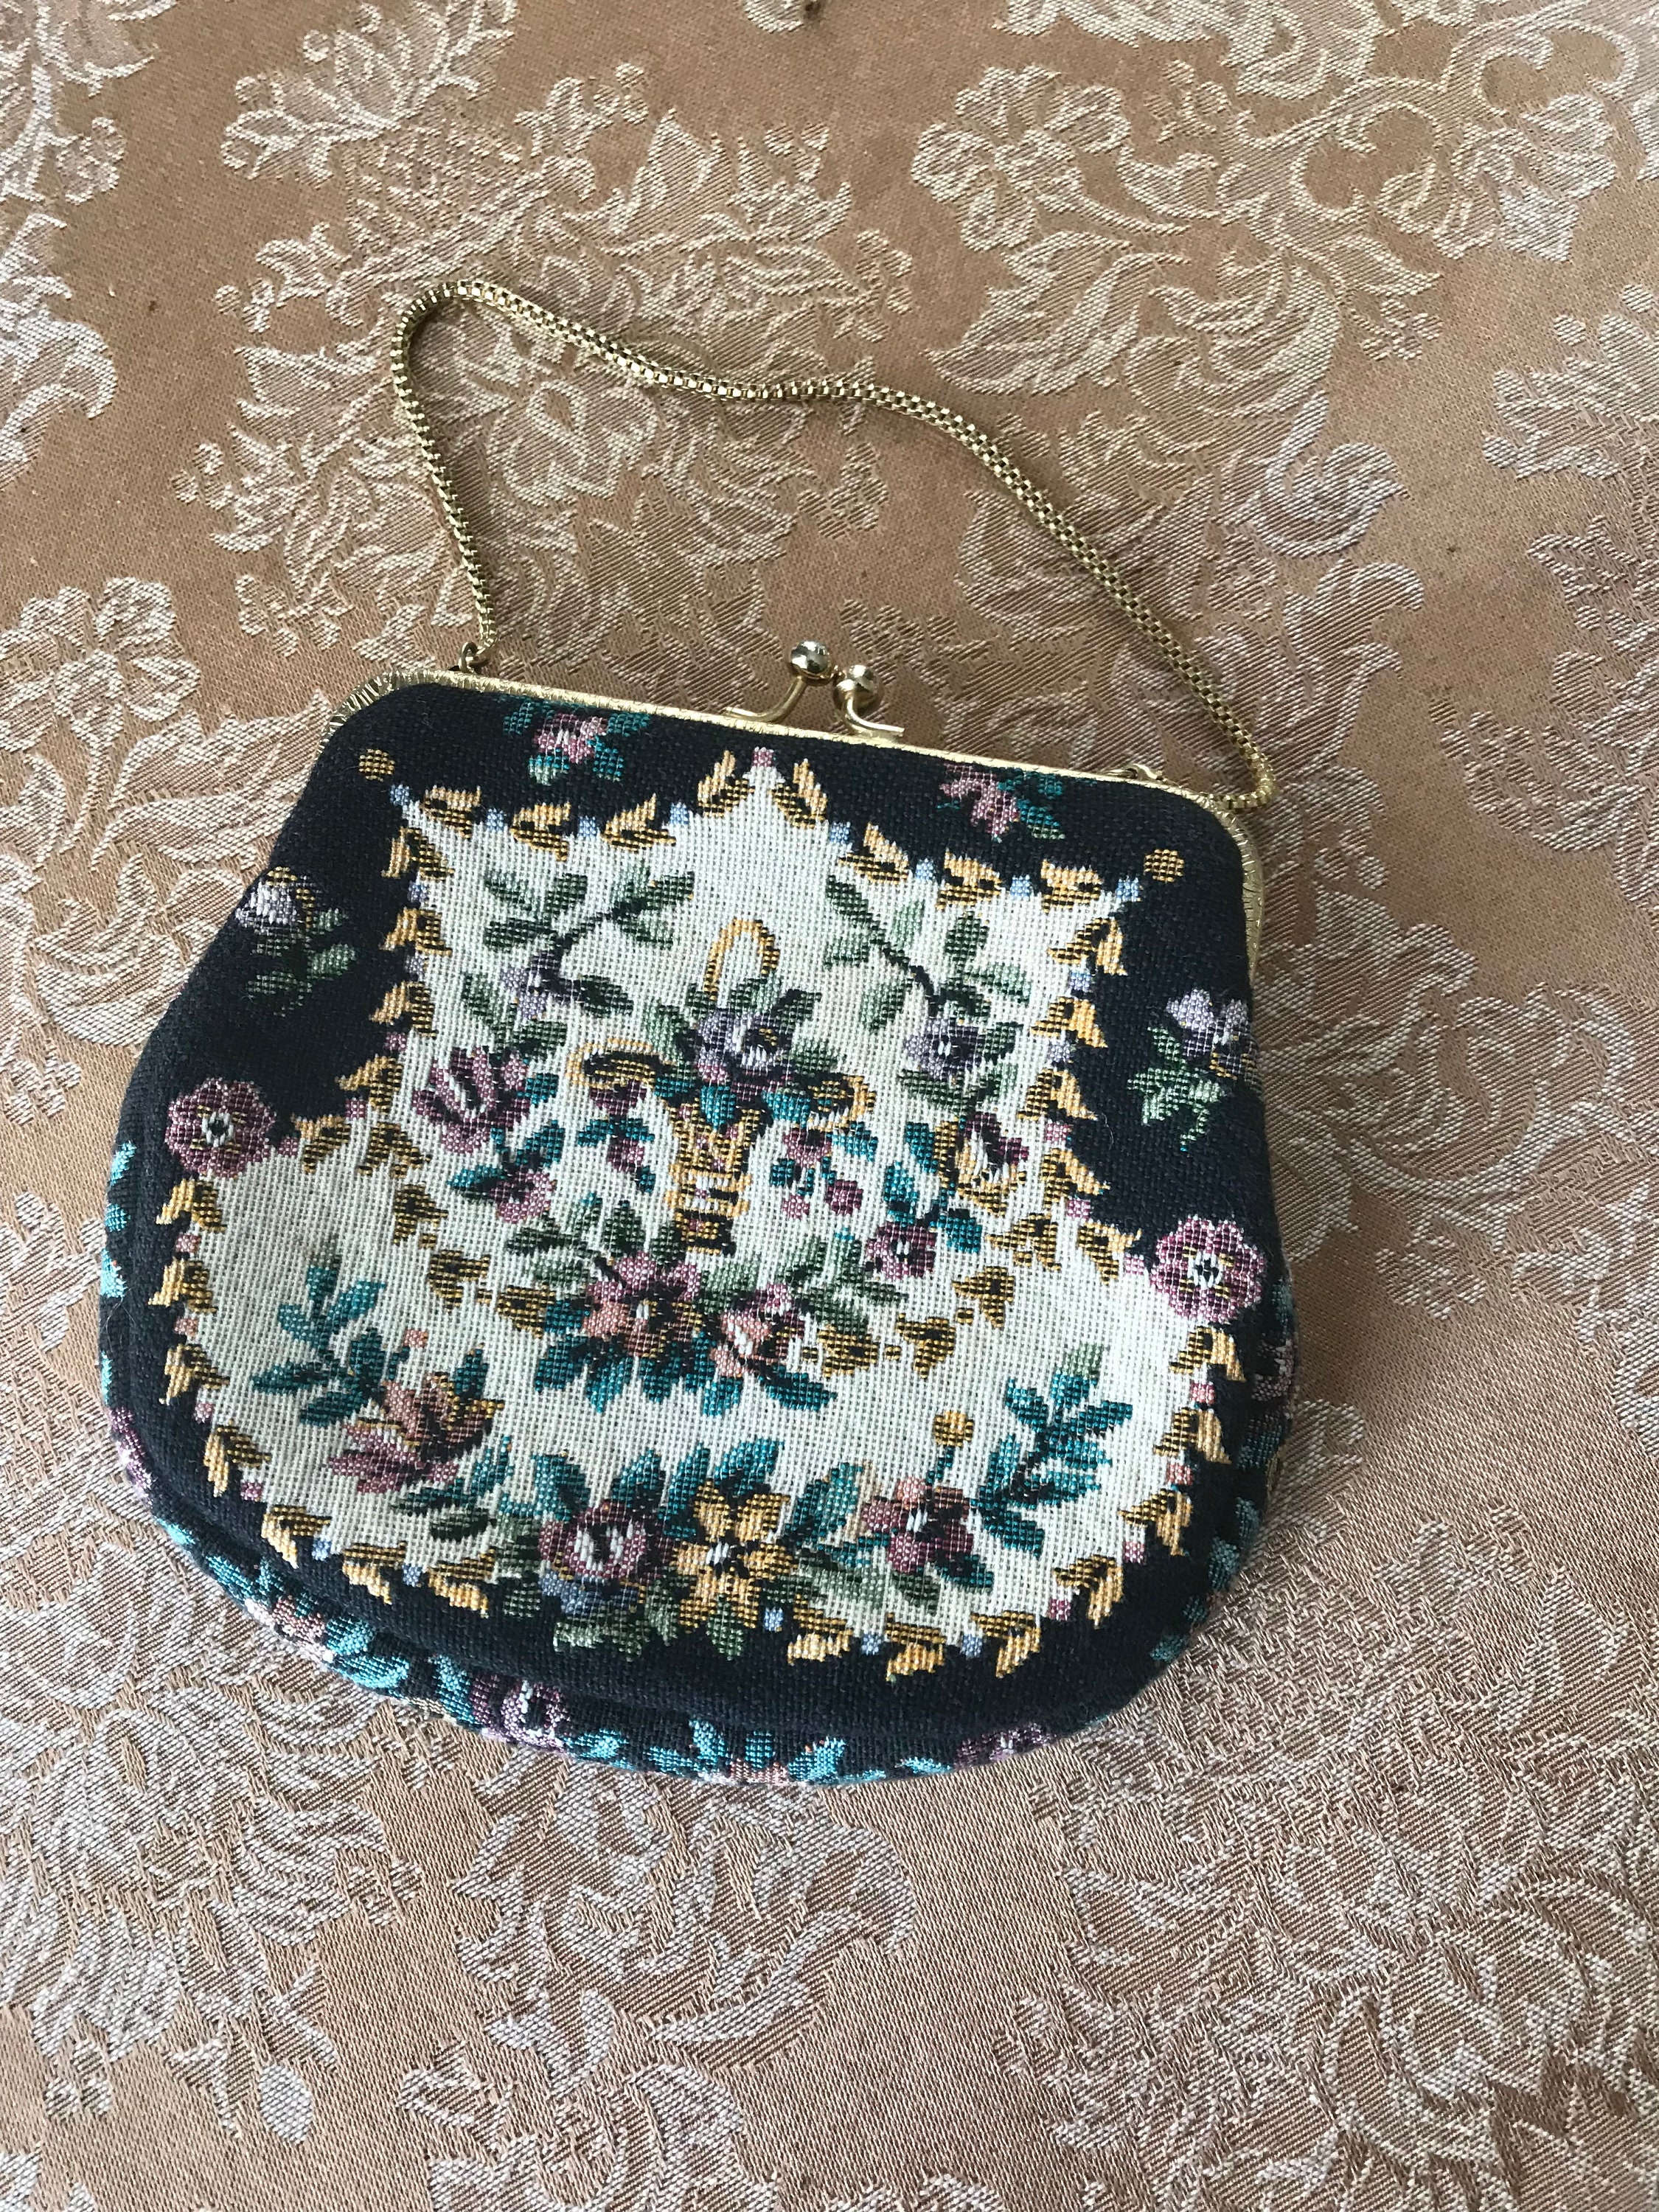 DIY Embroidery Bag Handcraft Needlework Cross Stitch Kit Hand Bag Purse  with Handle and Sling Chain Handbag Package Bag